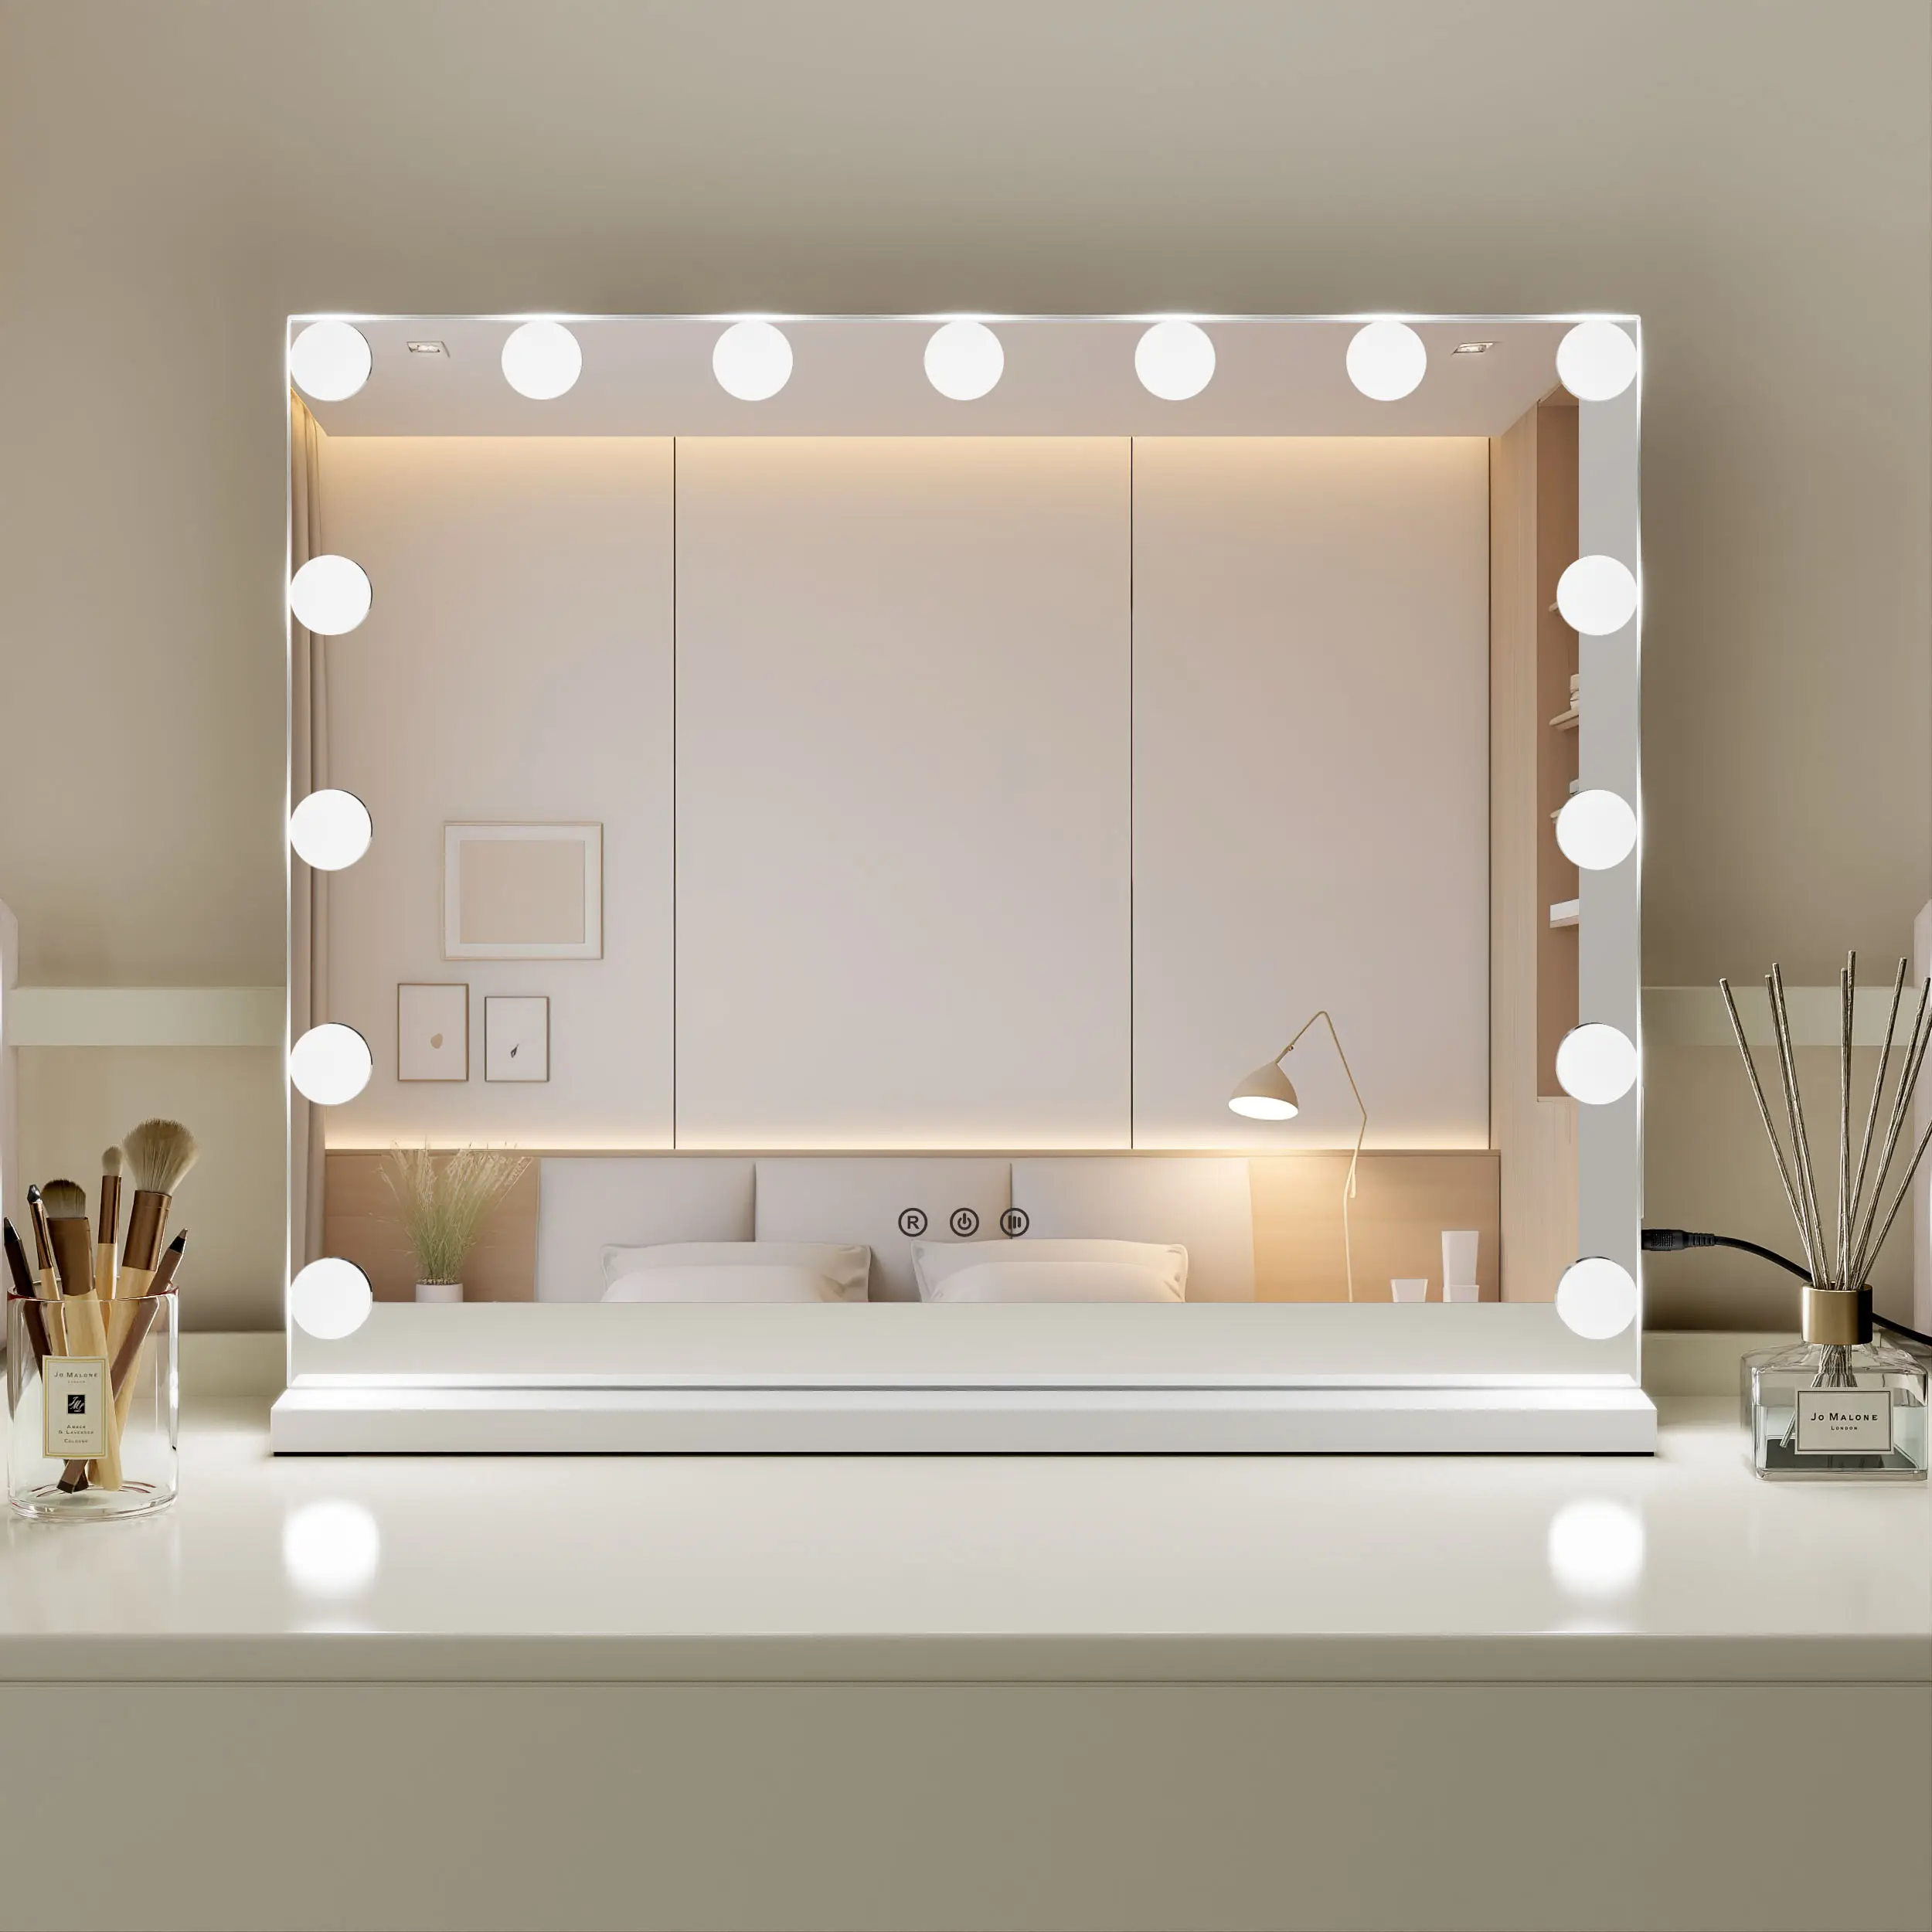 3 Colors Modes Usb Charging Port Touch Screen Makeup Mirror With Led Lights Illuminated Vanity Hollywood Mirror